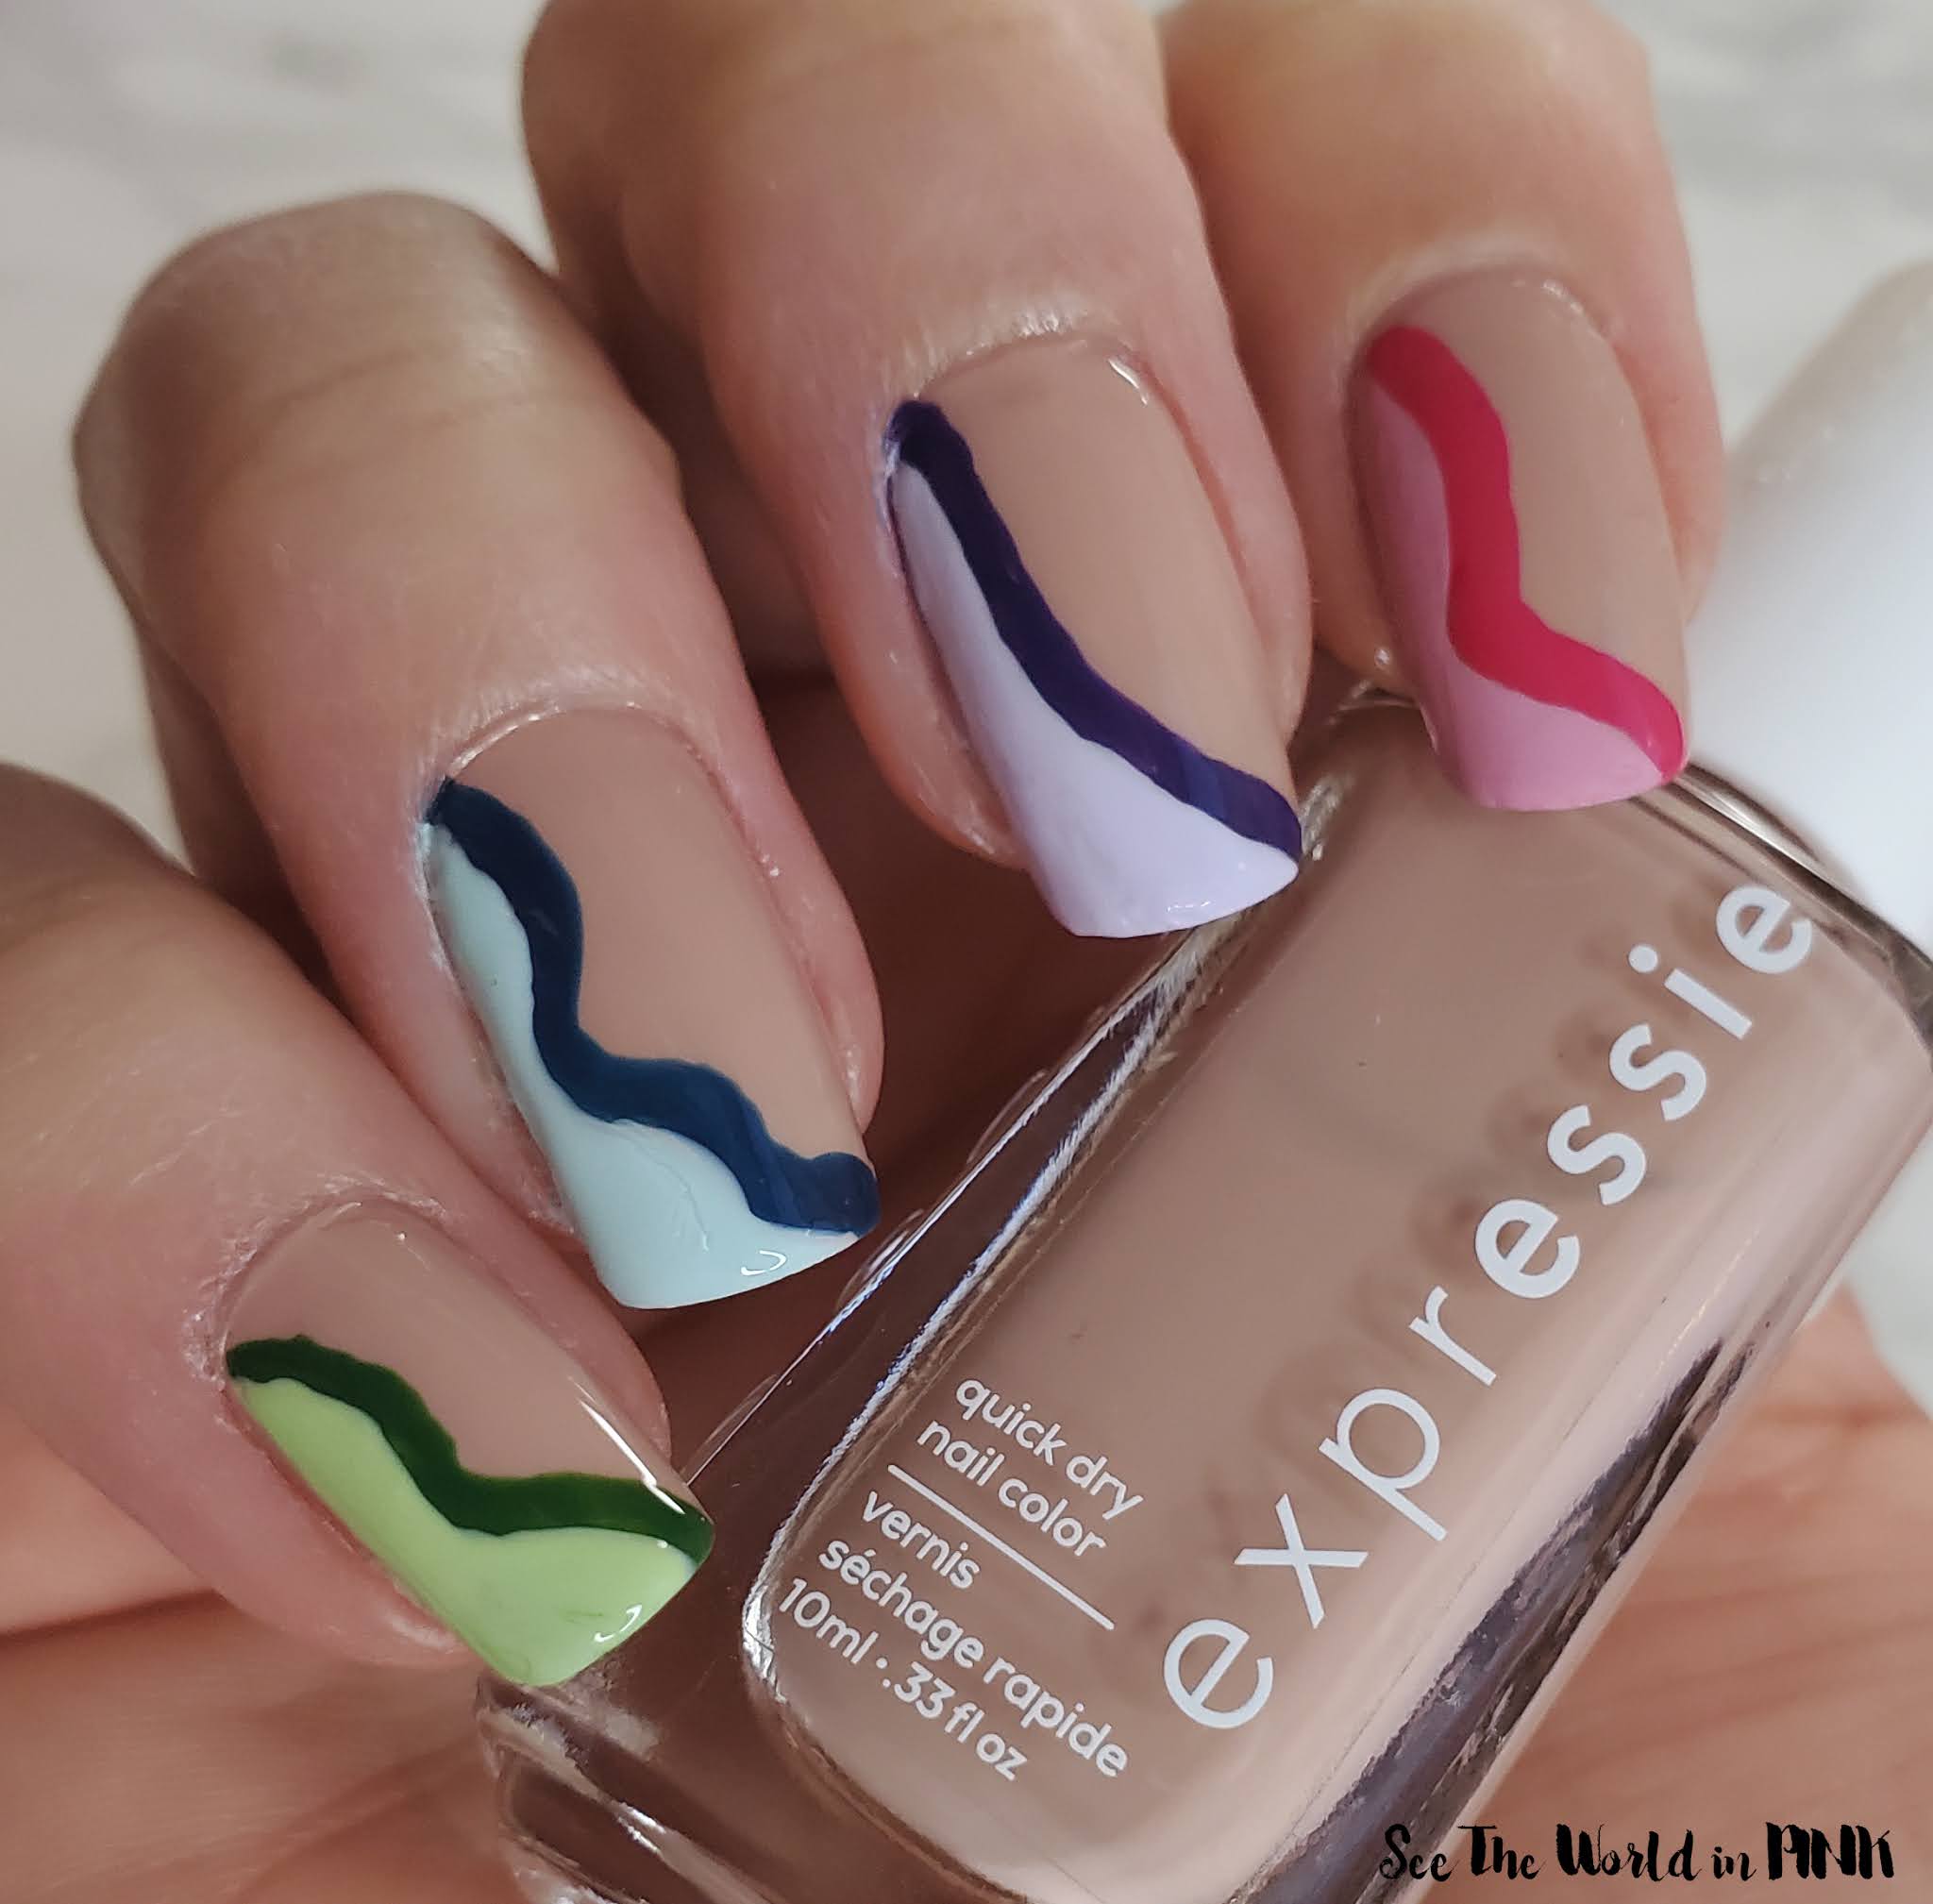 Manicure Monday "Negative Space" Squiggly Line French Mani See the